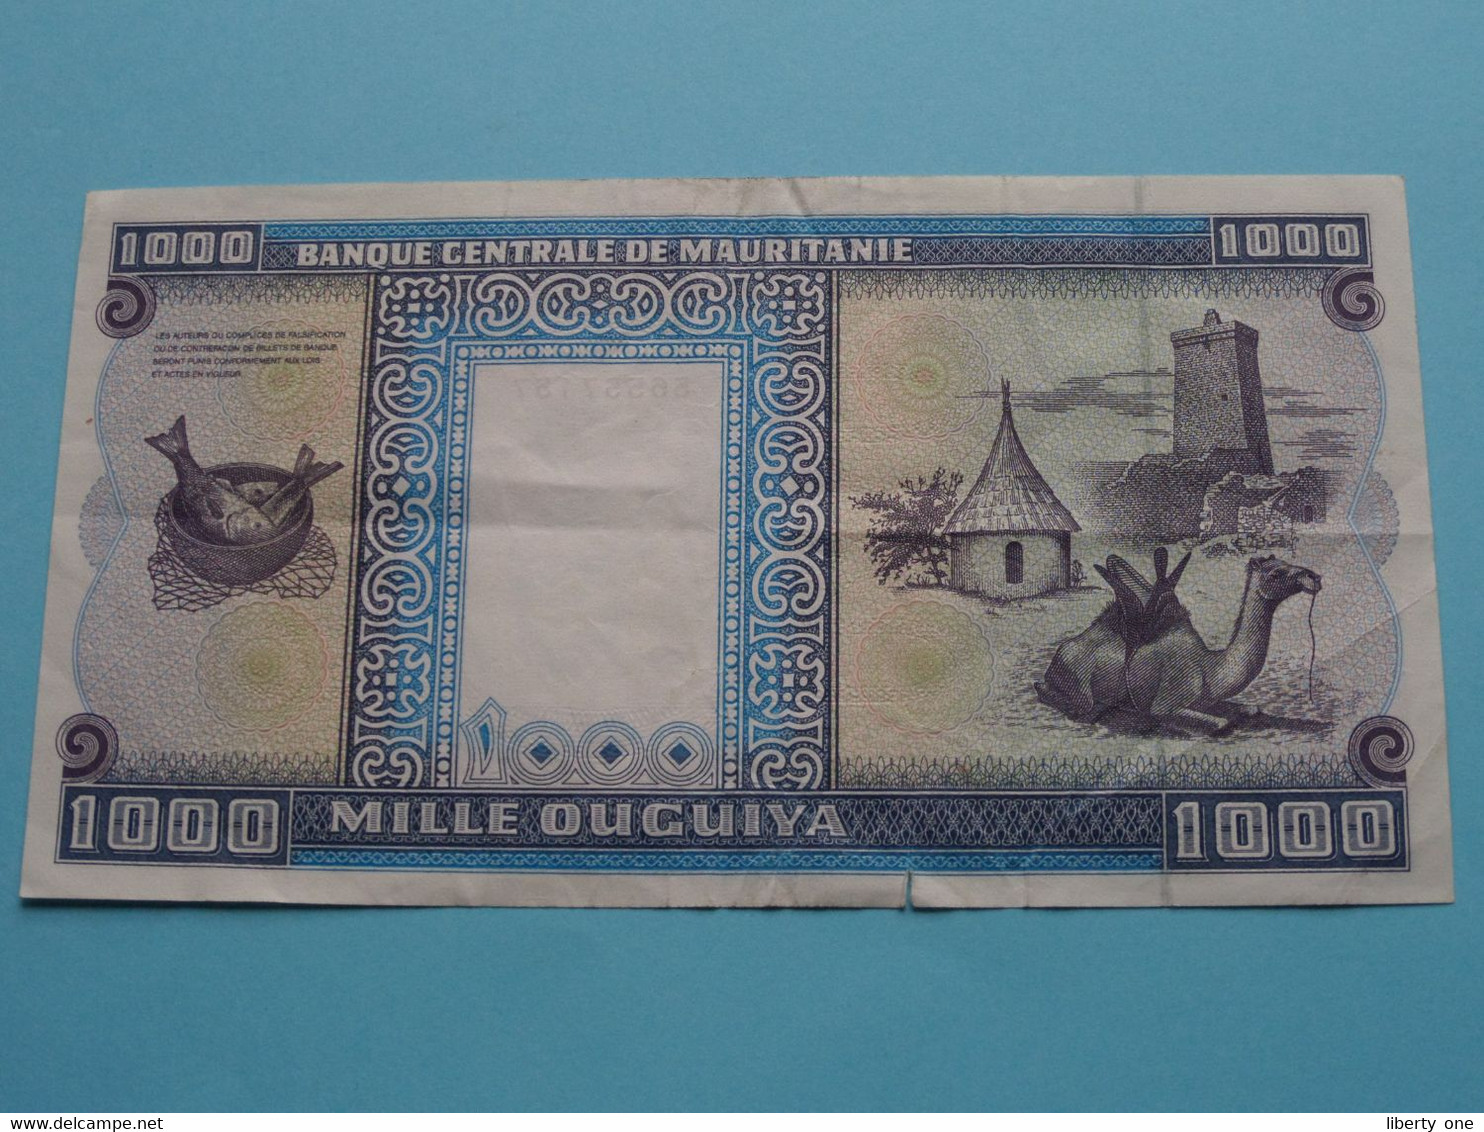 1000 Mille OUGUIYA - 28/11/1993 ( For Grade, Please See SCANS ) Circulated ( Small Tear ) ! - Mauritanië